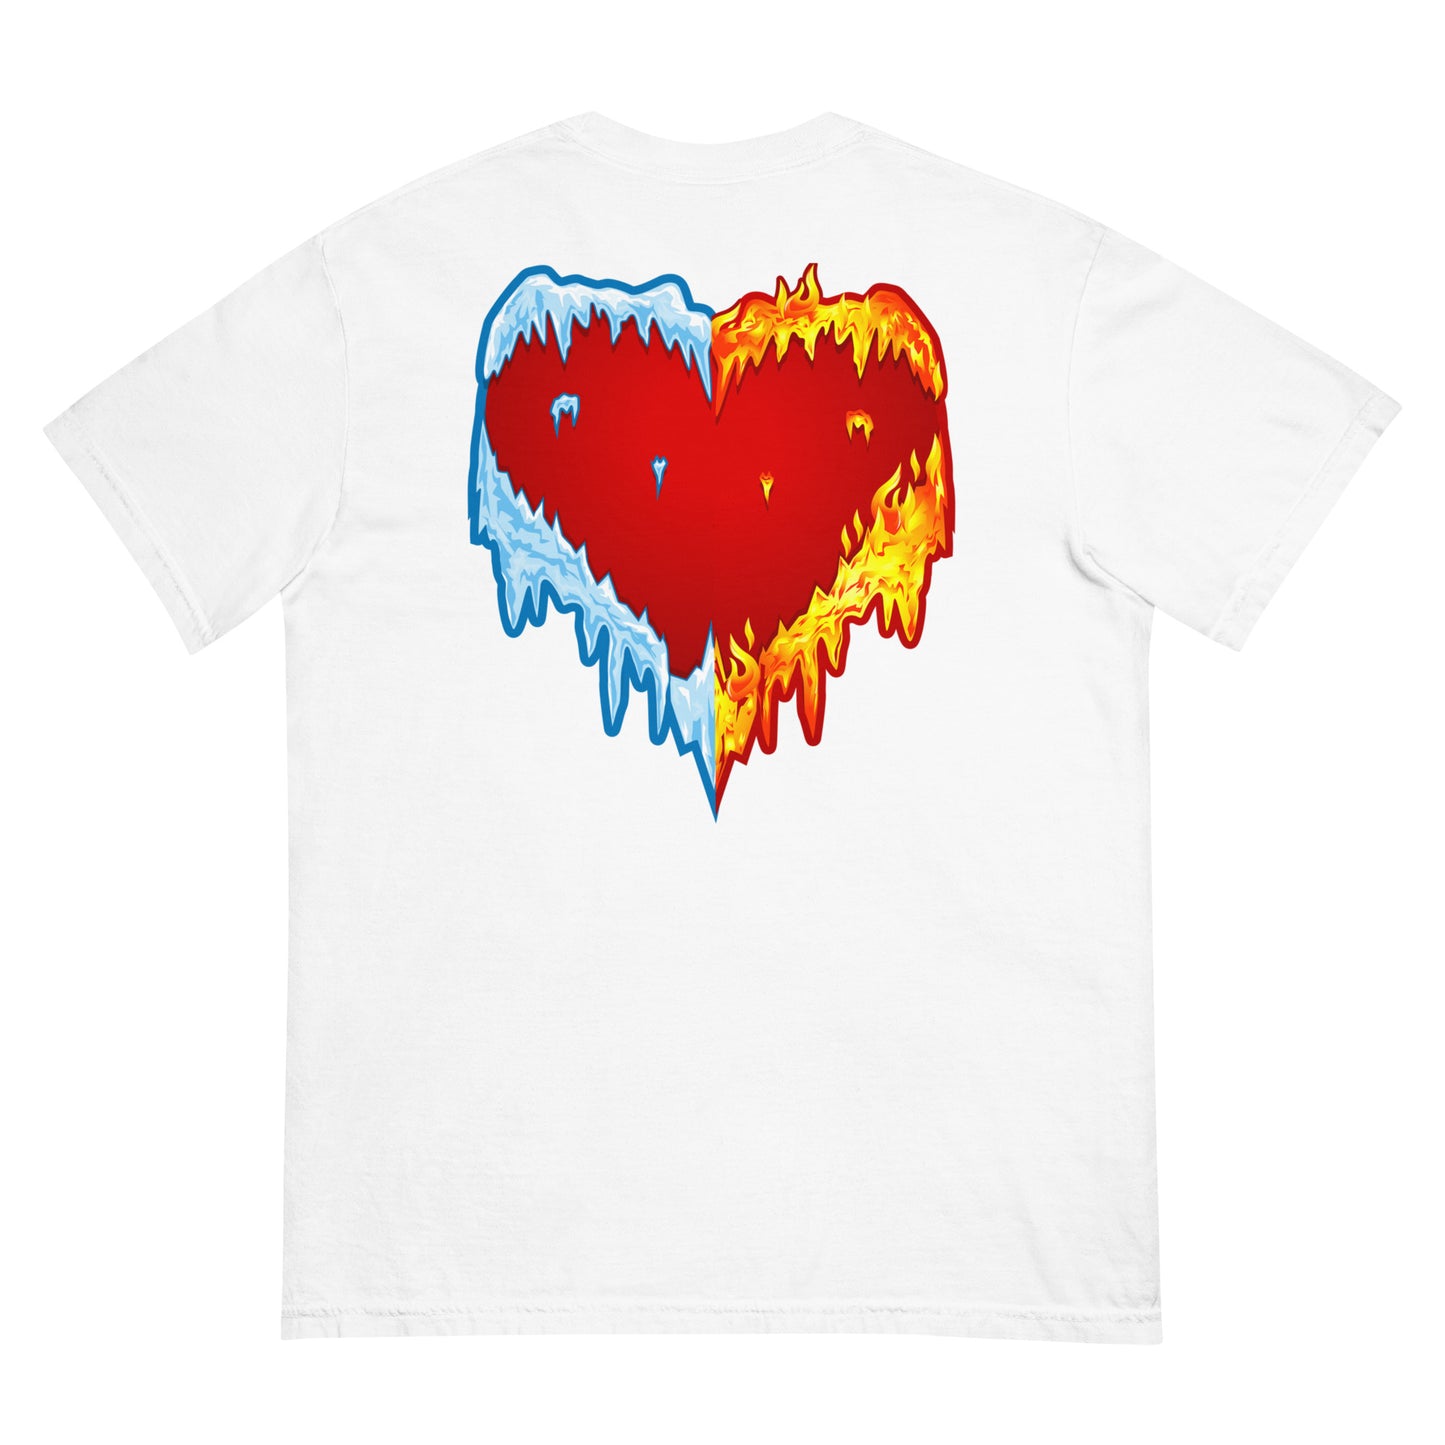 Limited Edition Fire and Ice Tee